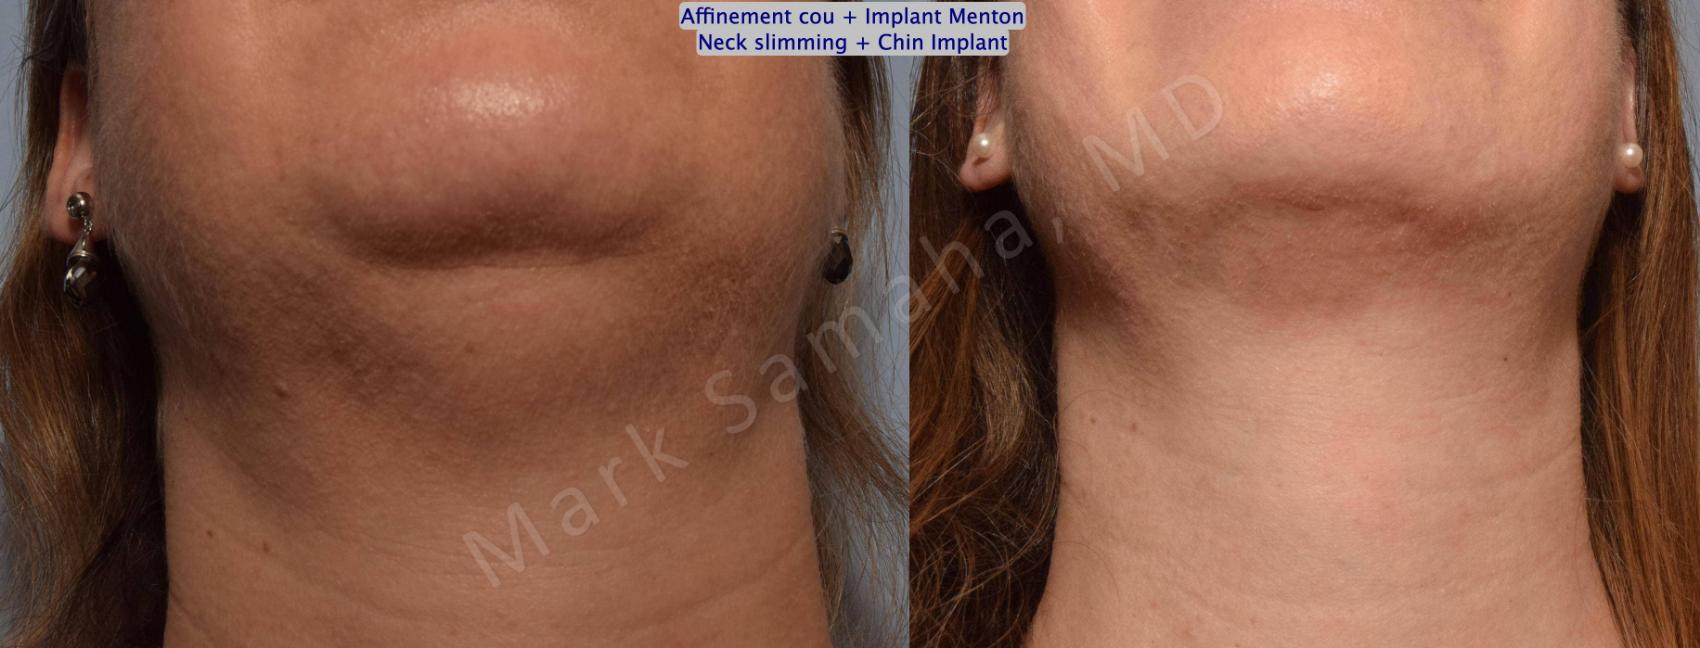 Before & After Chirurgie d’affinement du visage / Face Slimming Surgery Case 161 Neck Cou View in Montreal, QC